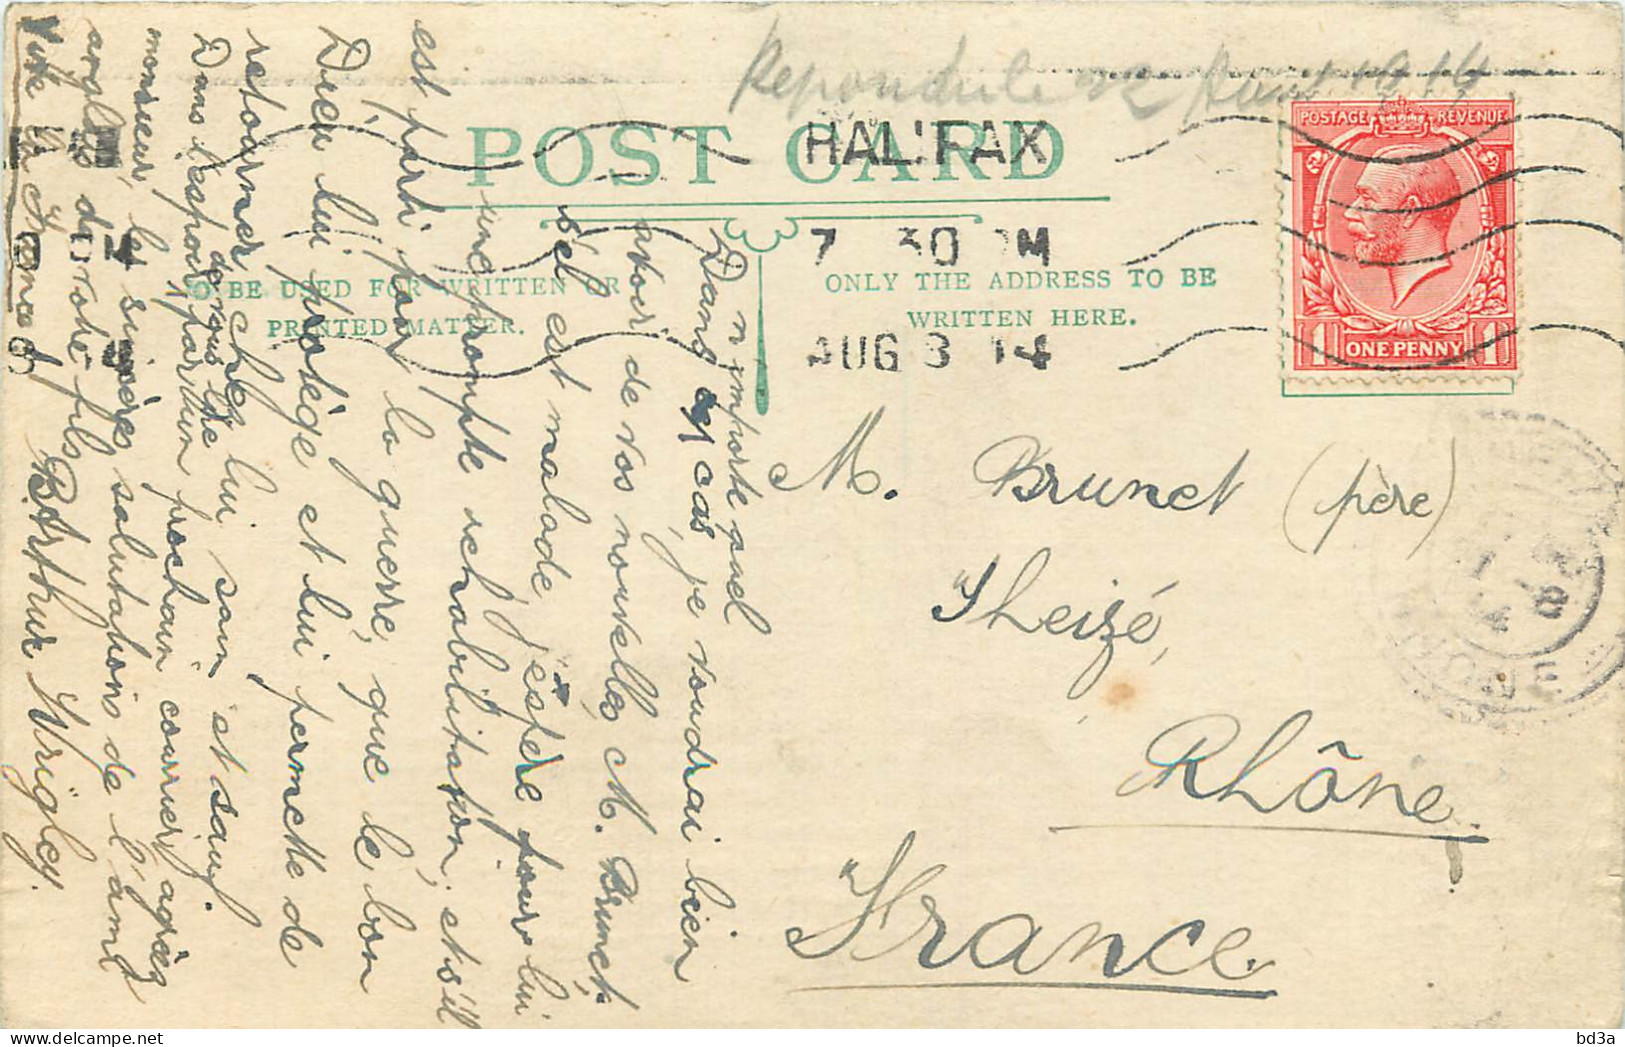  POST CARD - ONE PENNY - Stamped Stationery, Airletters & Aerogrammes